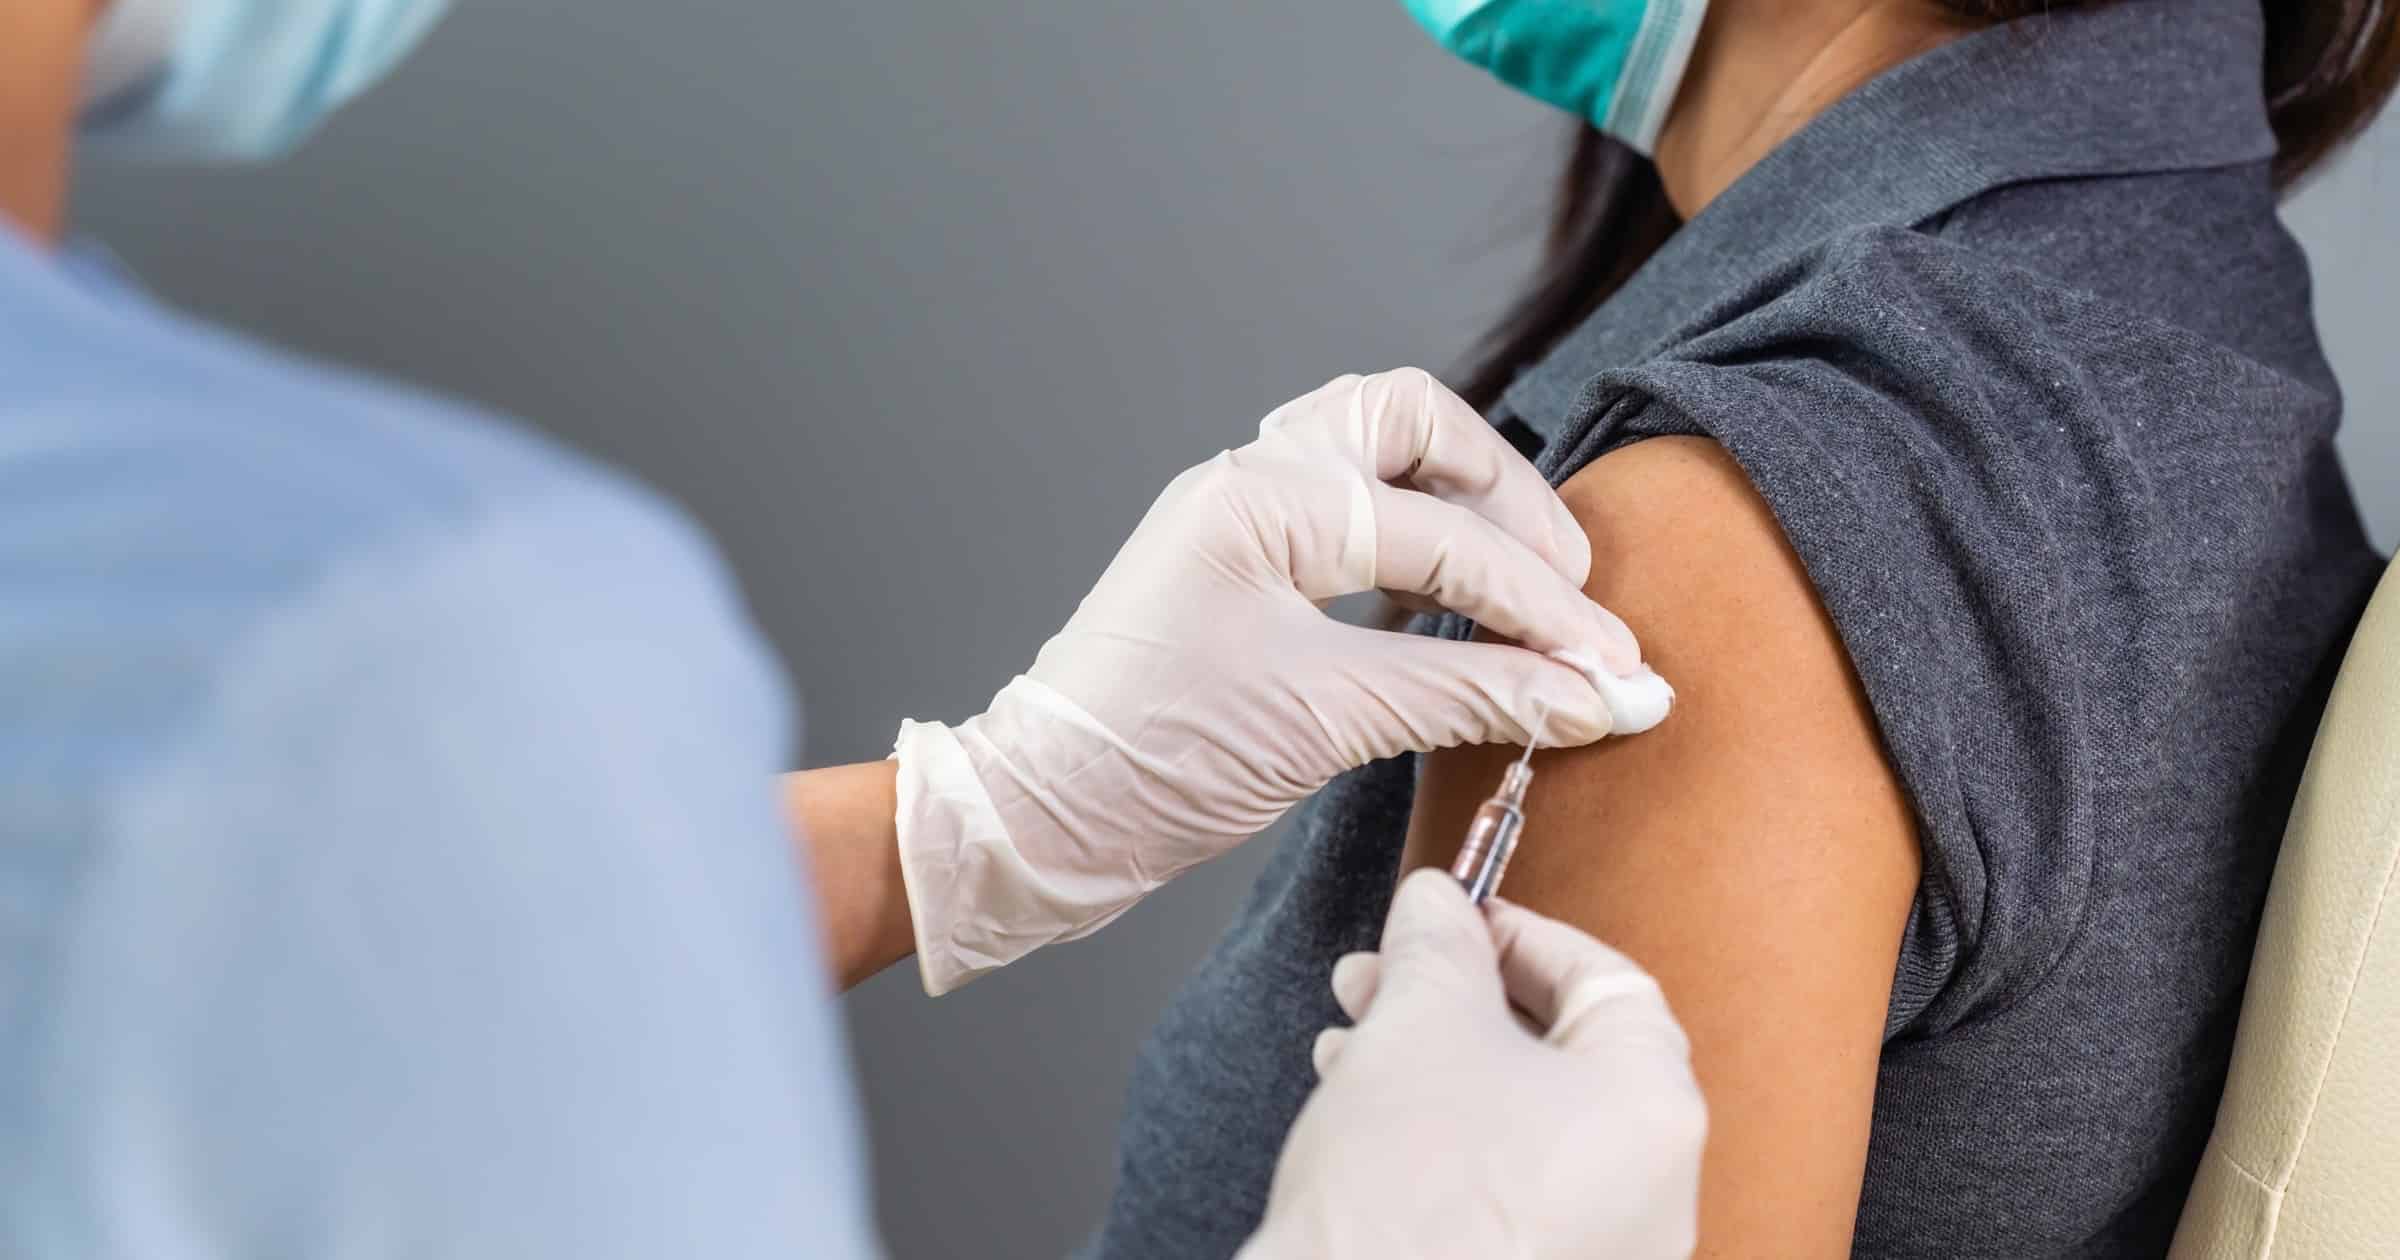 CES 2022 Will Require Proof of Vaccination From Attendees